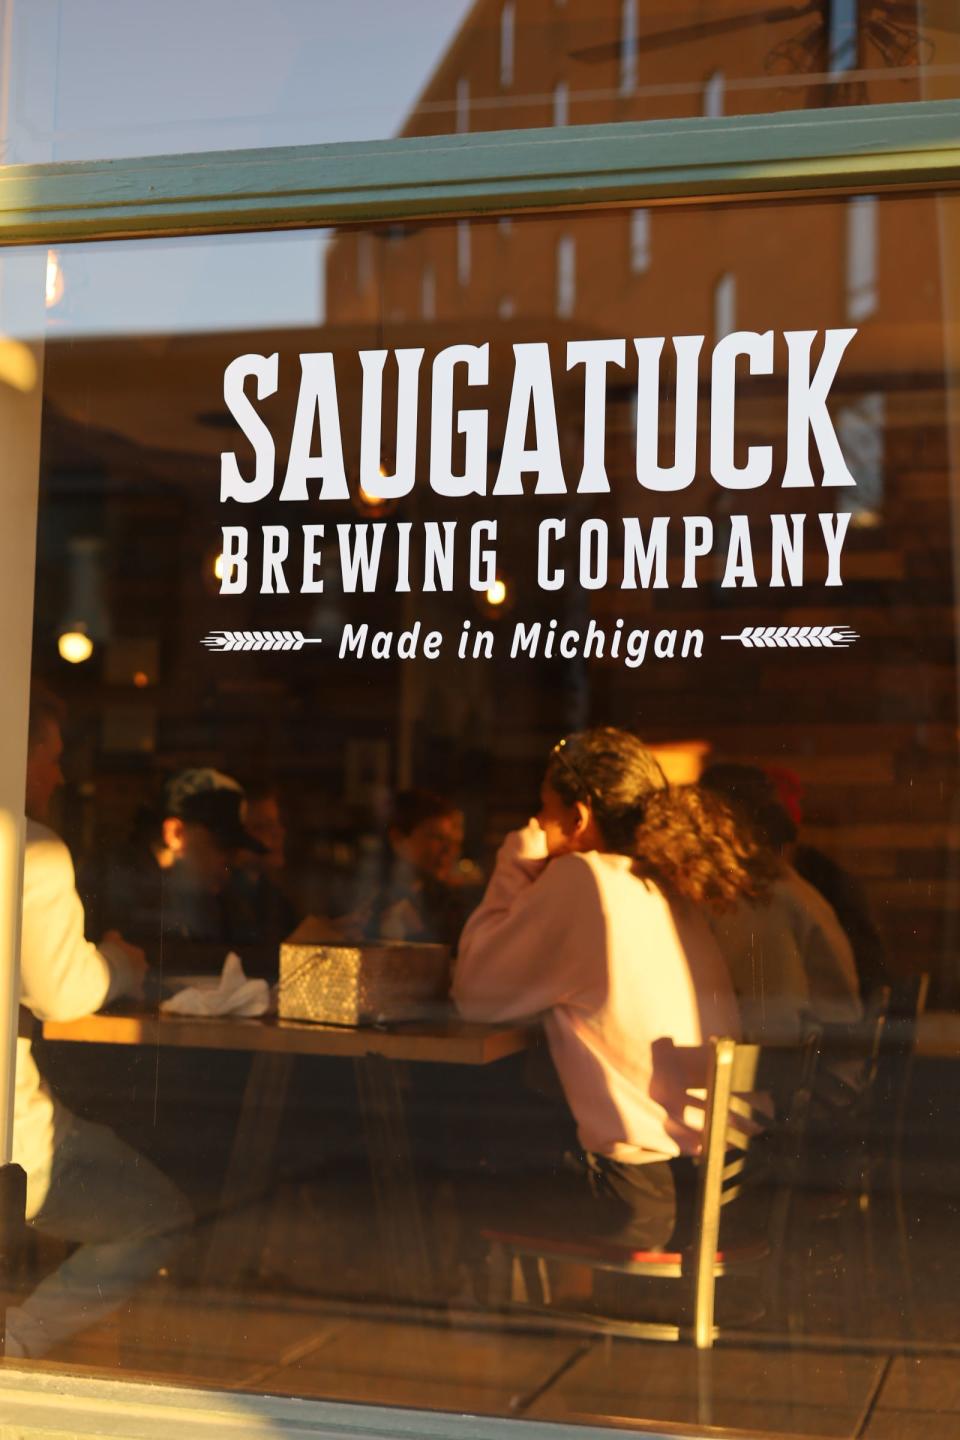 Saugatuck Brewing Company announced new leadership Thursday, June 1, naming John Miller its new president and CEO and Brad Mixan its new CFO.